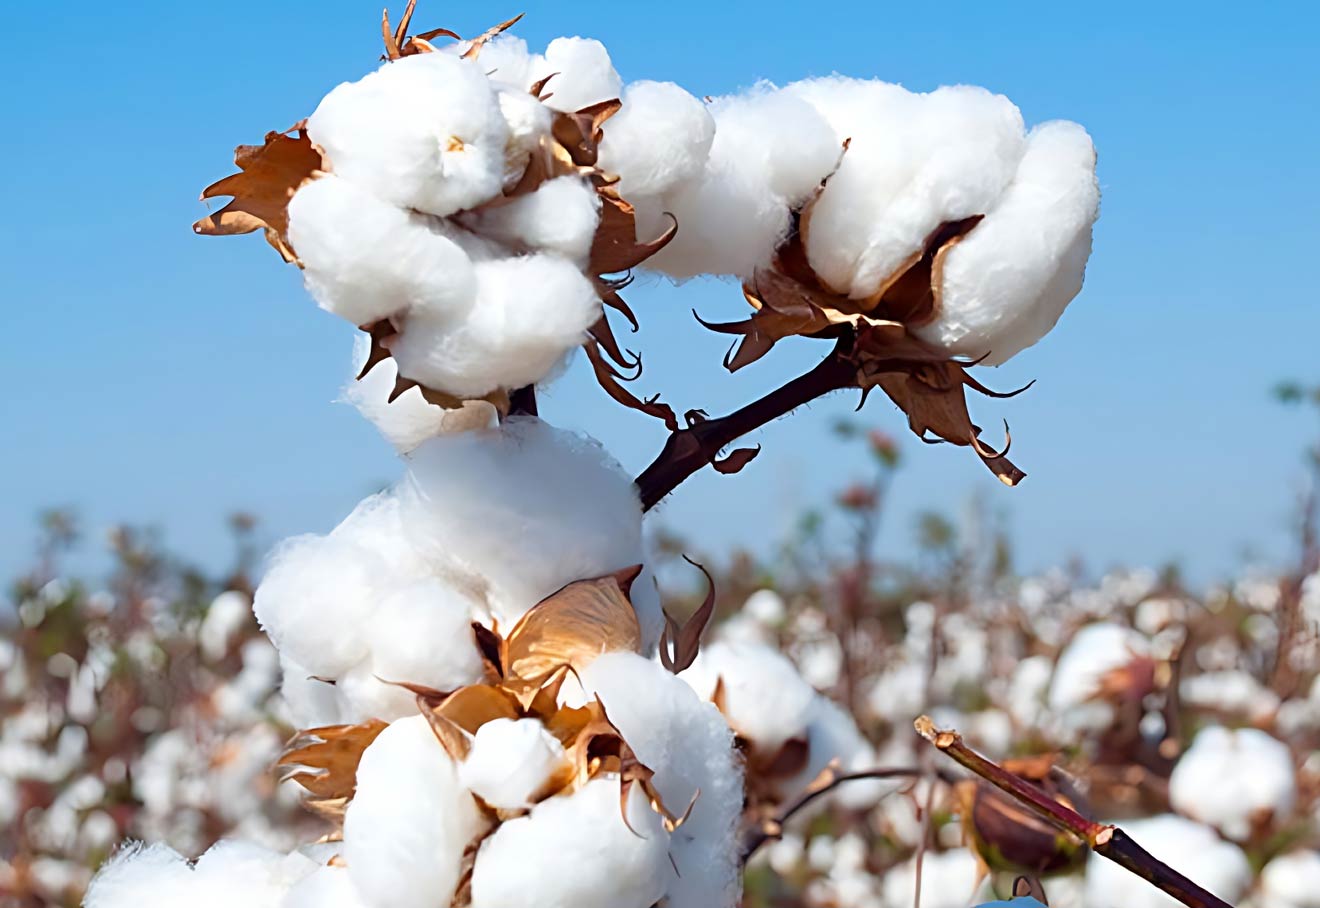 Govt Should Remove Import Duty On Cotton Varieties Not Grown In India: SIMA